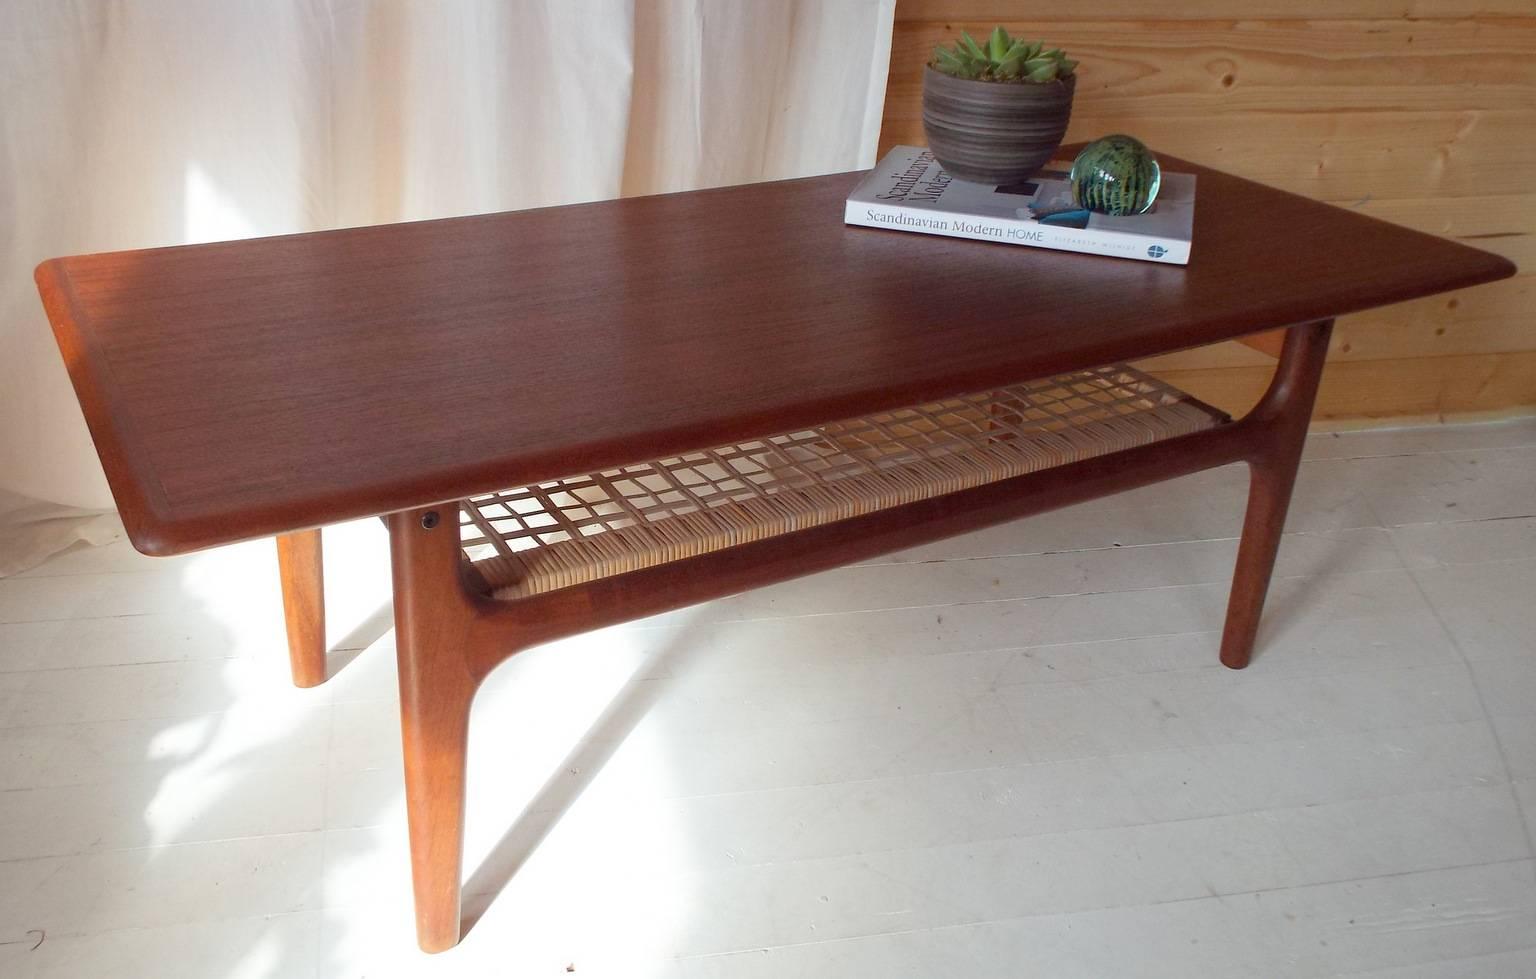 HC studio are pleased to offer this wonderful coffee table by esteemed manufacturers, Trioh of Denmark. Manufactured using teak, the sculpted frame is in lovely condition, with seamless joints and gently tapering legs that are the hallmark of high